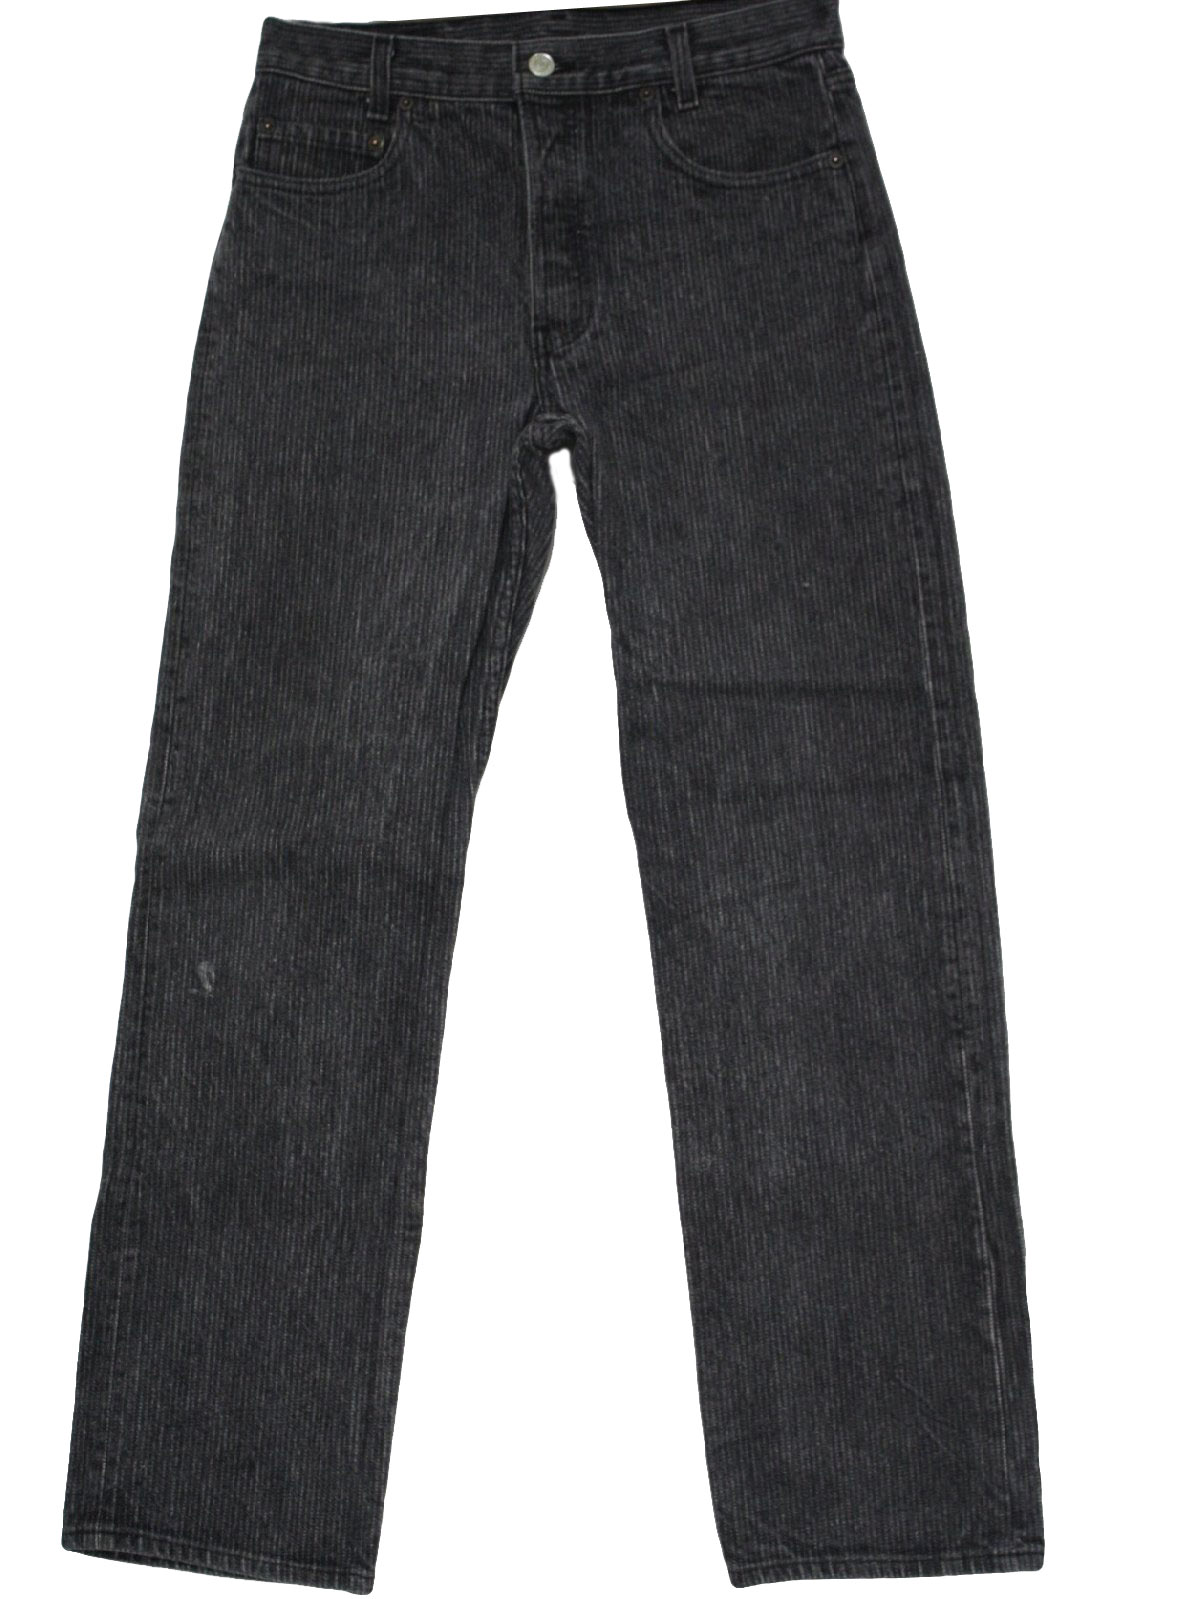 80s Retro Pants: late 80s -Levis- Mens grey and white with black ...